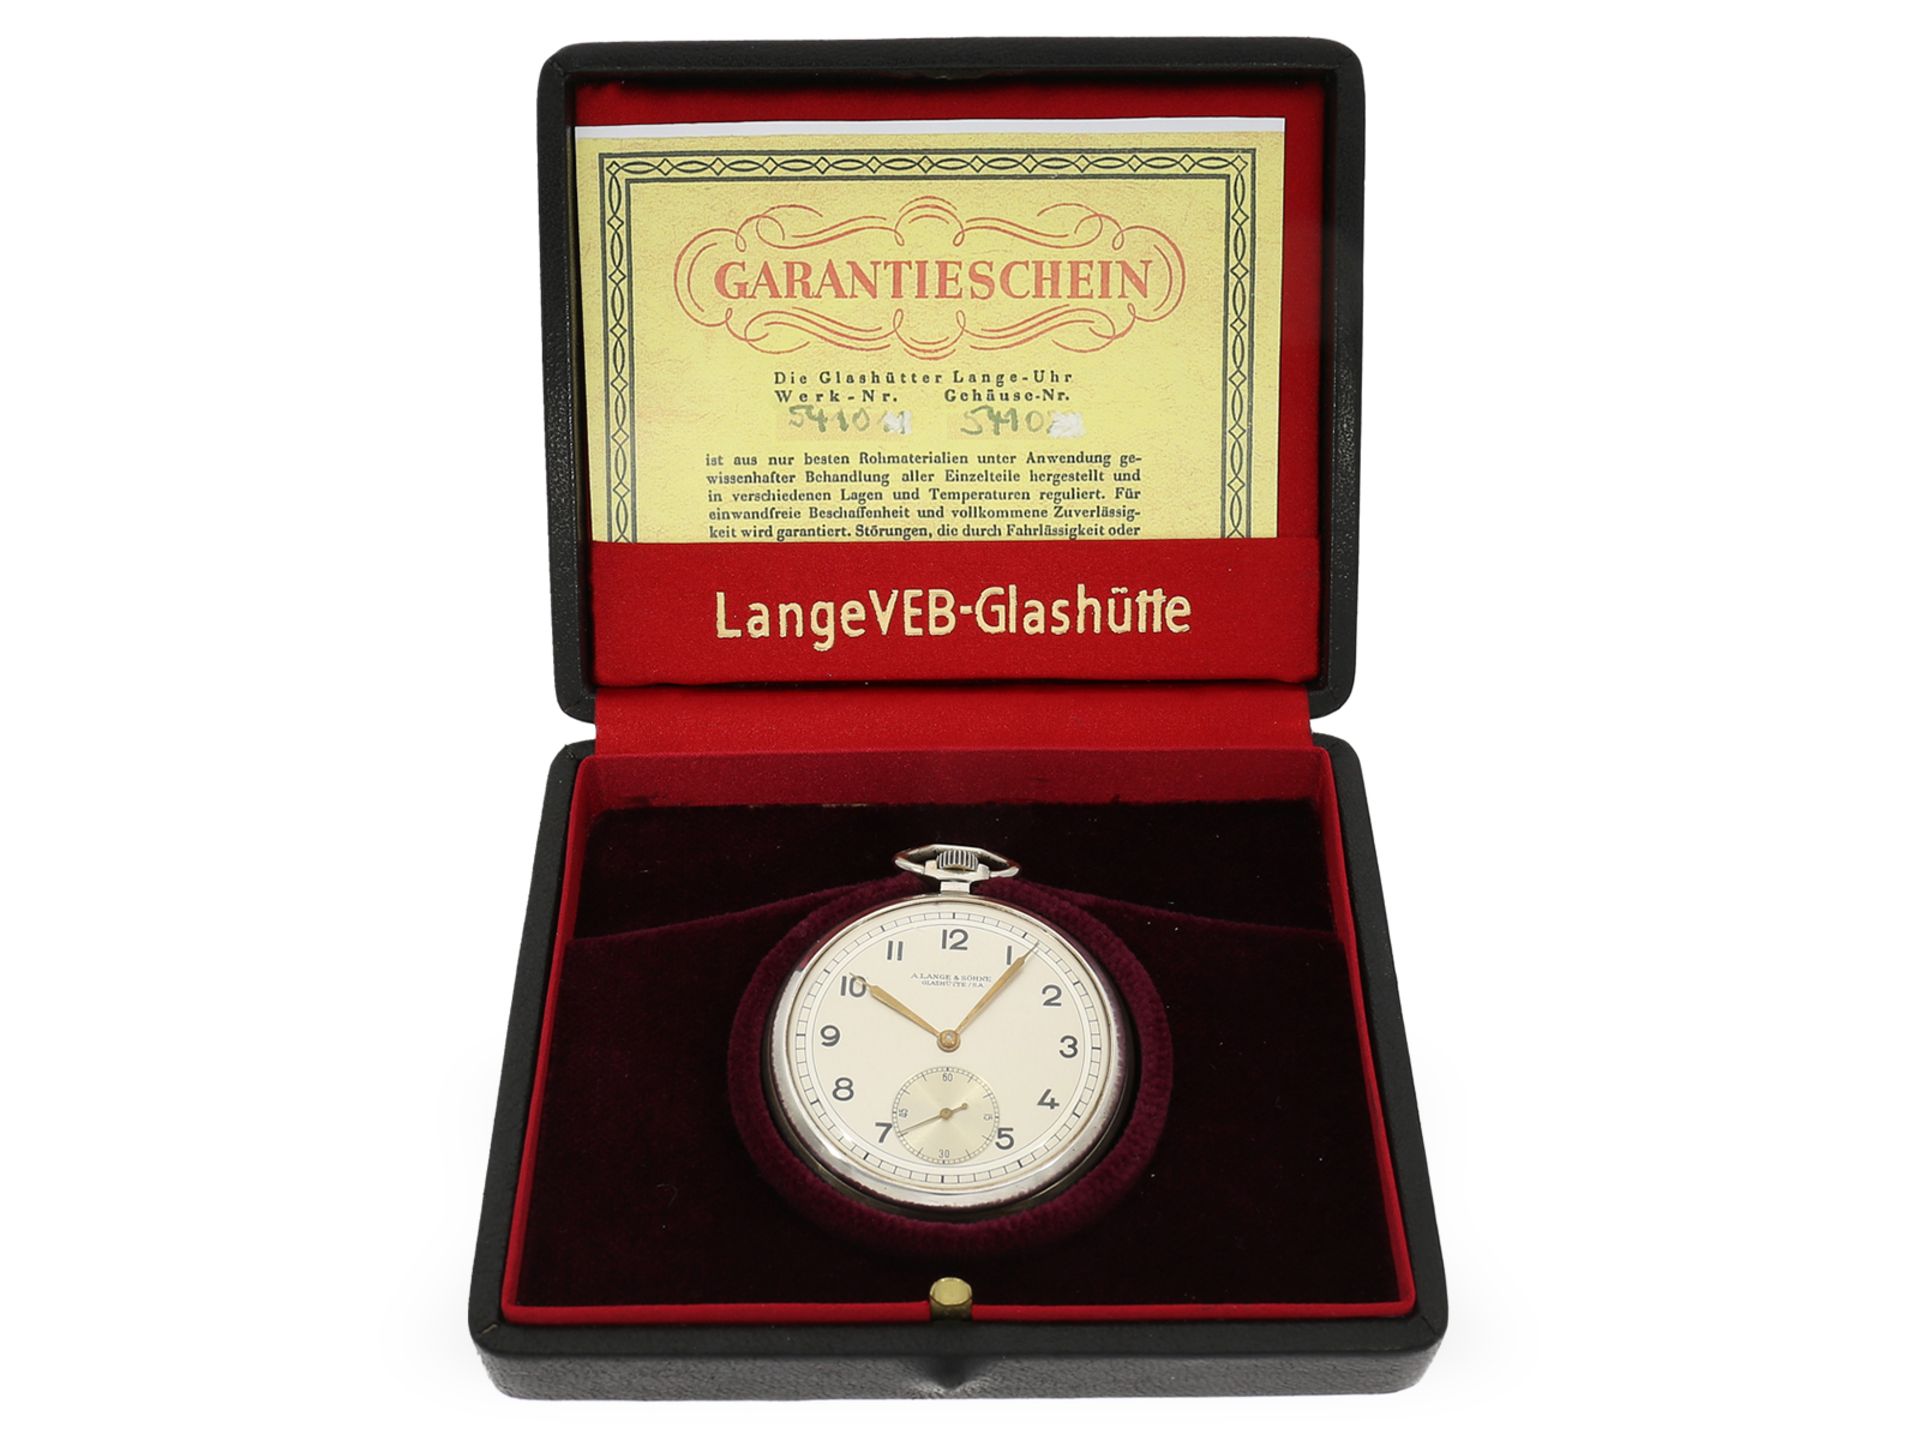 Pocket watch: A. Lange & Söhne Glashütte dress watch with original box and papers - Image 6 of 6